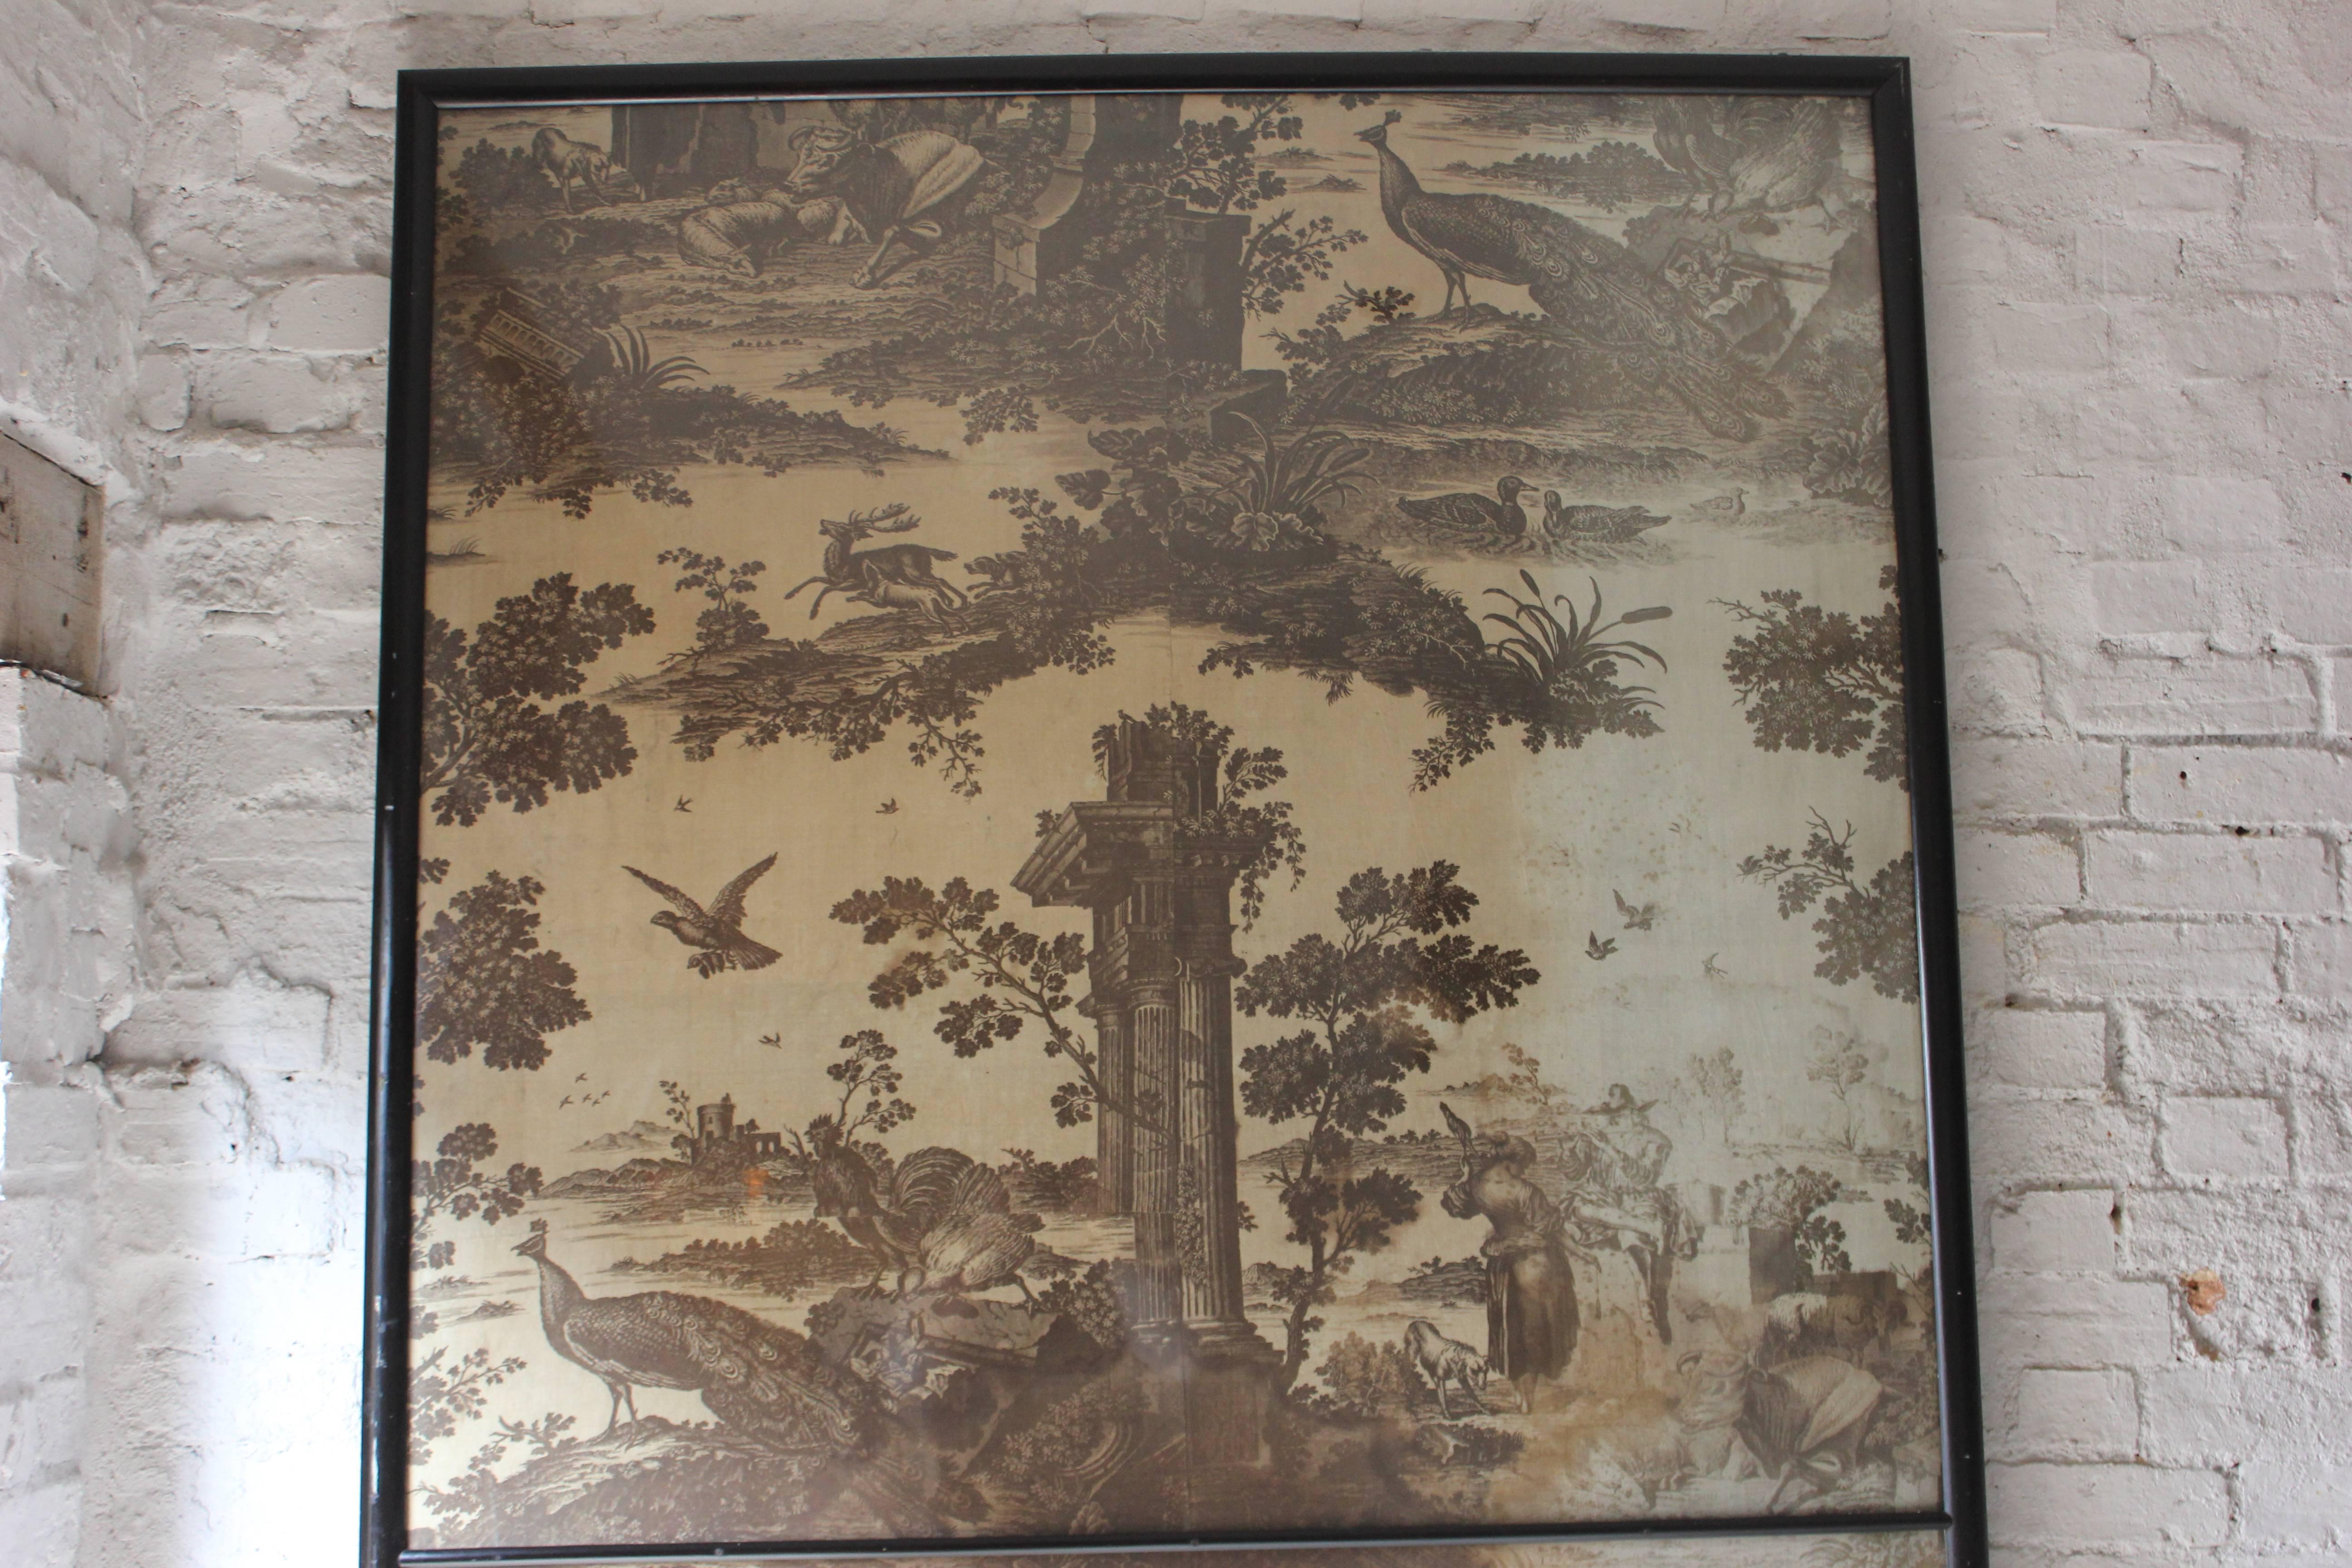 Large Framed Mid-18thC Section of 'Toiles de Jouy' Wall Covering; 'The Old Ford' 1